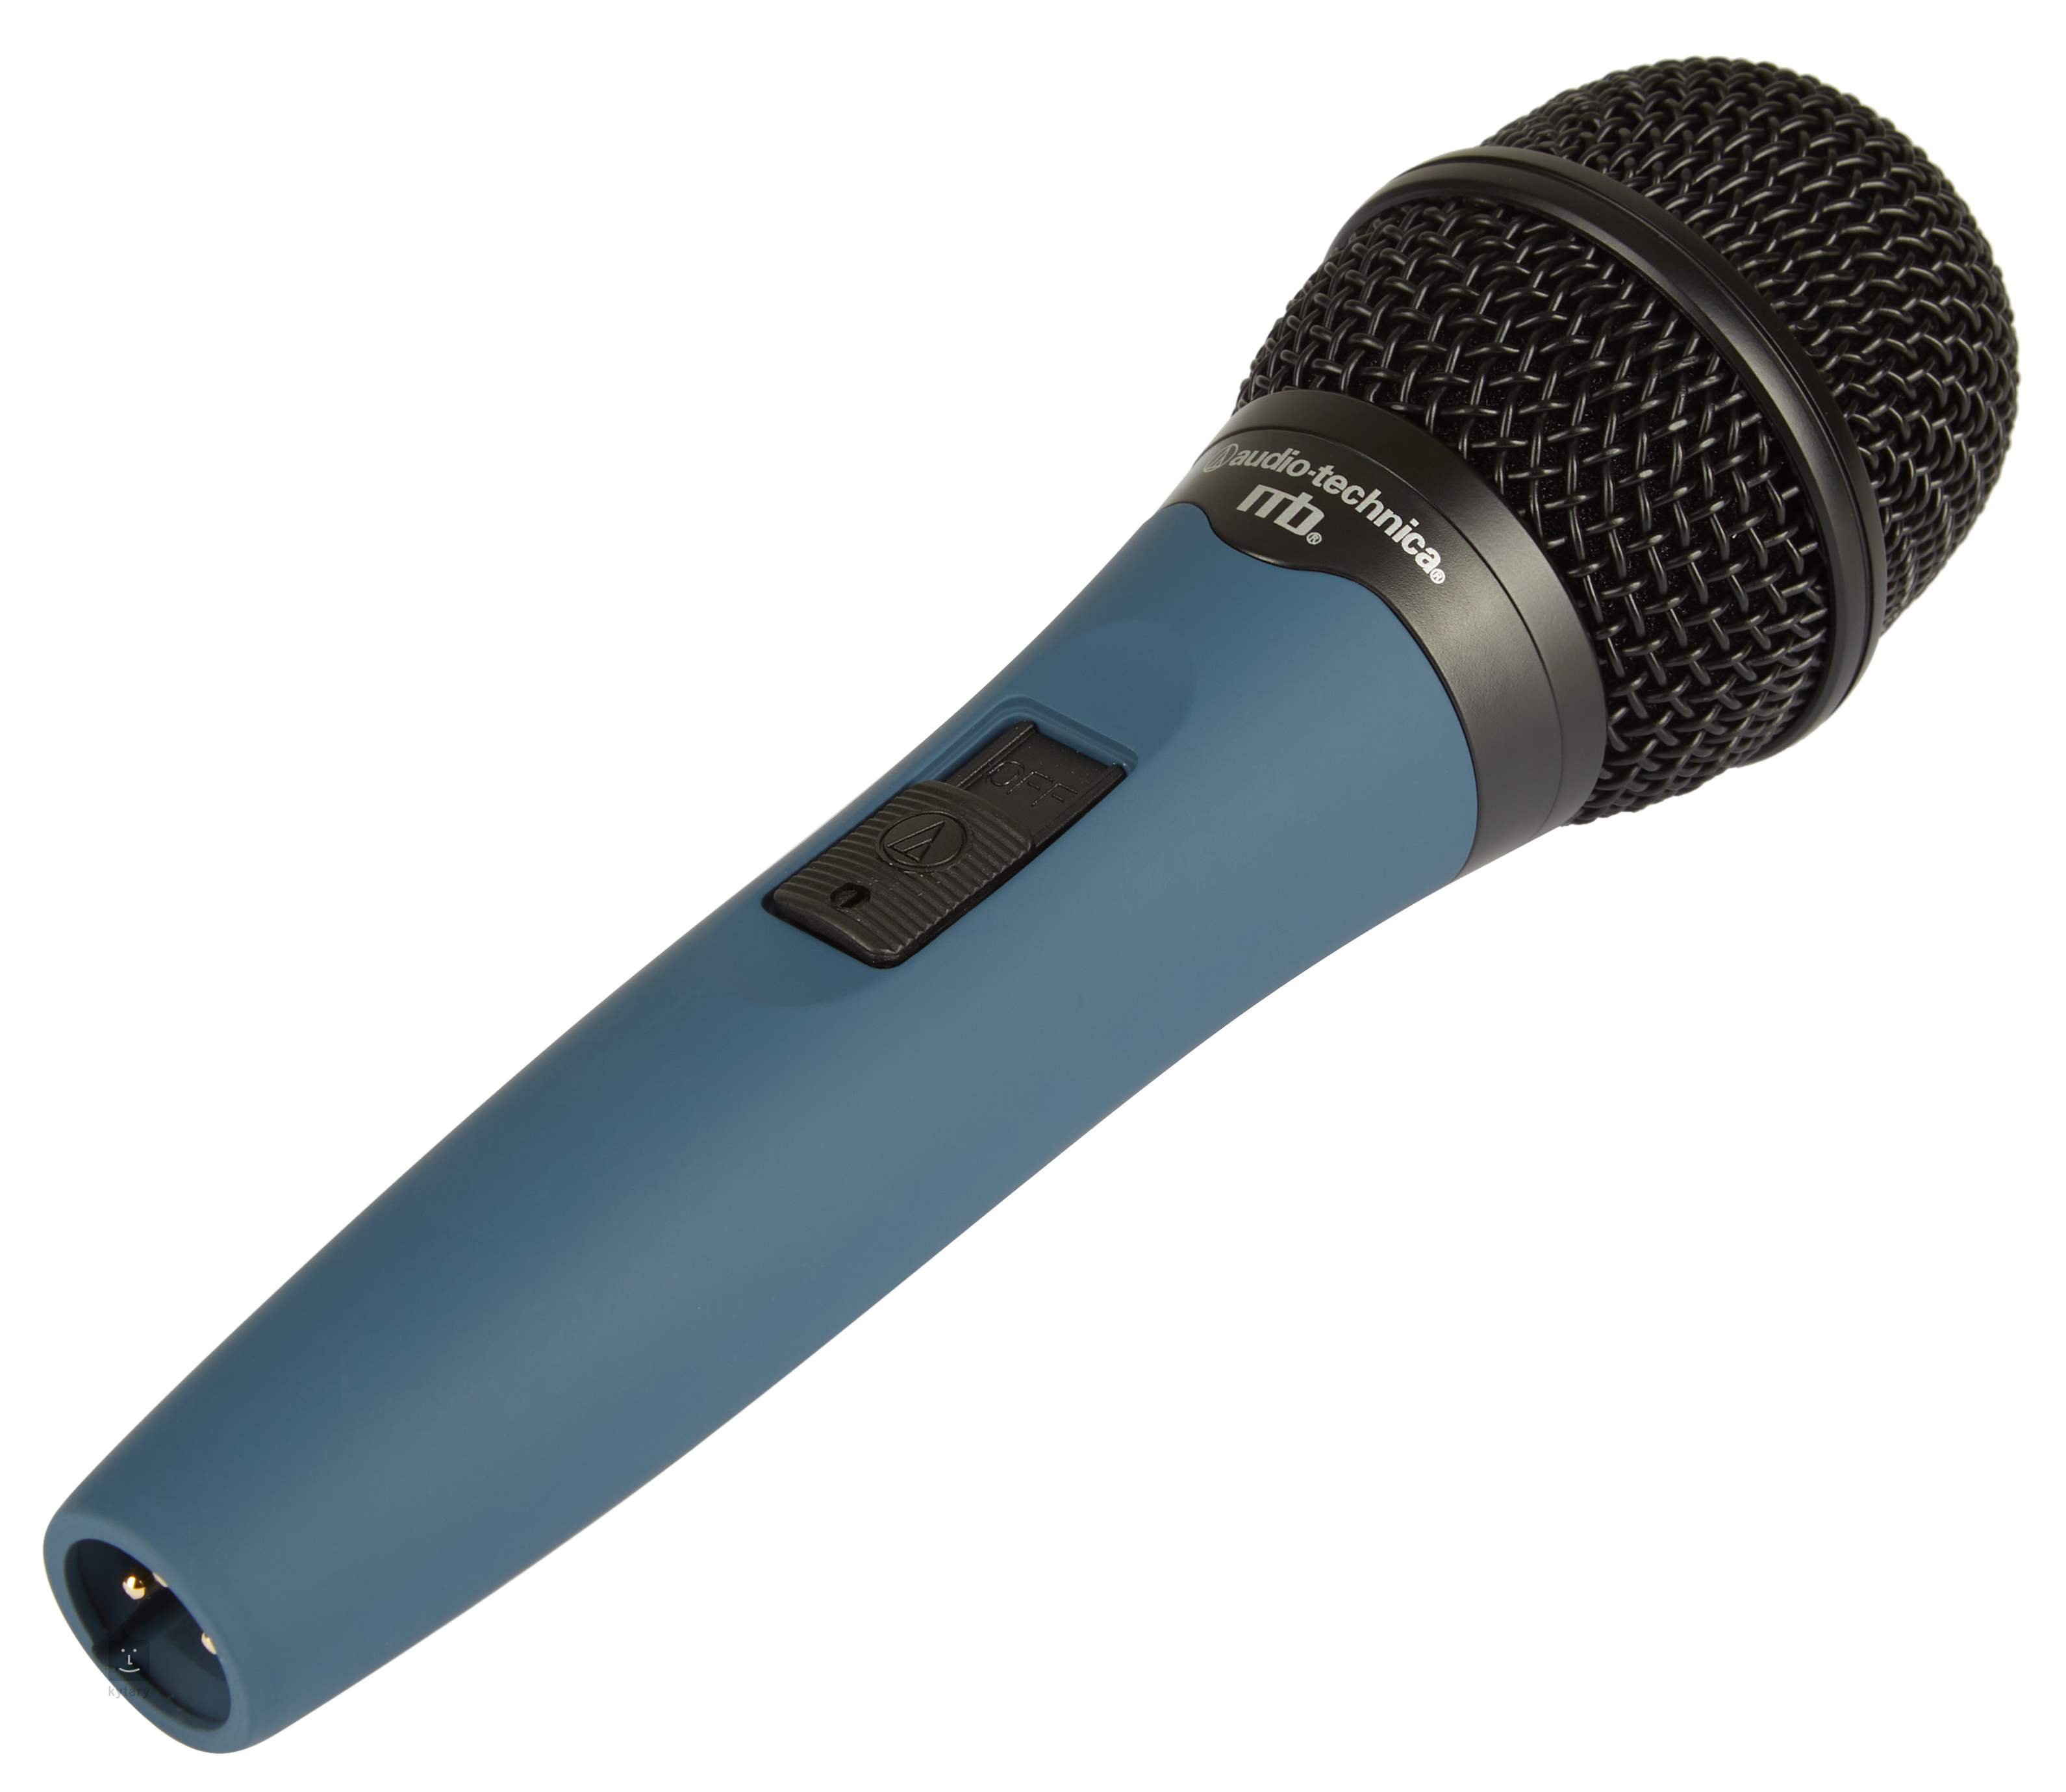 AUDIO-TECHNICA MB3K Dynamic Microphone with Switch